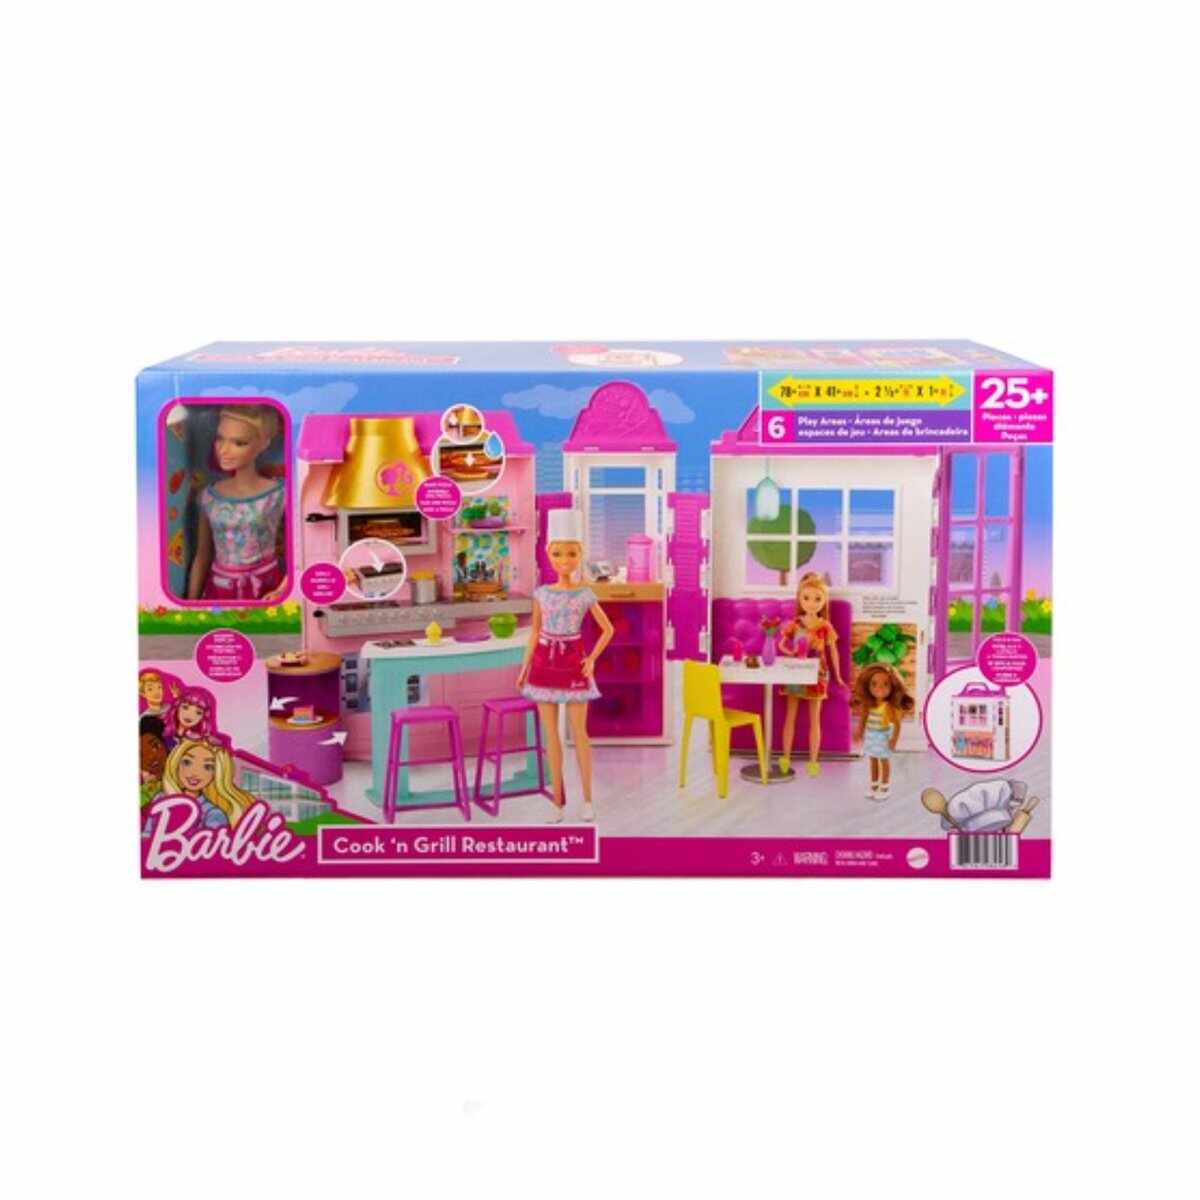 Set restaurant, Barbie, Cook and Grill